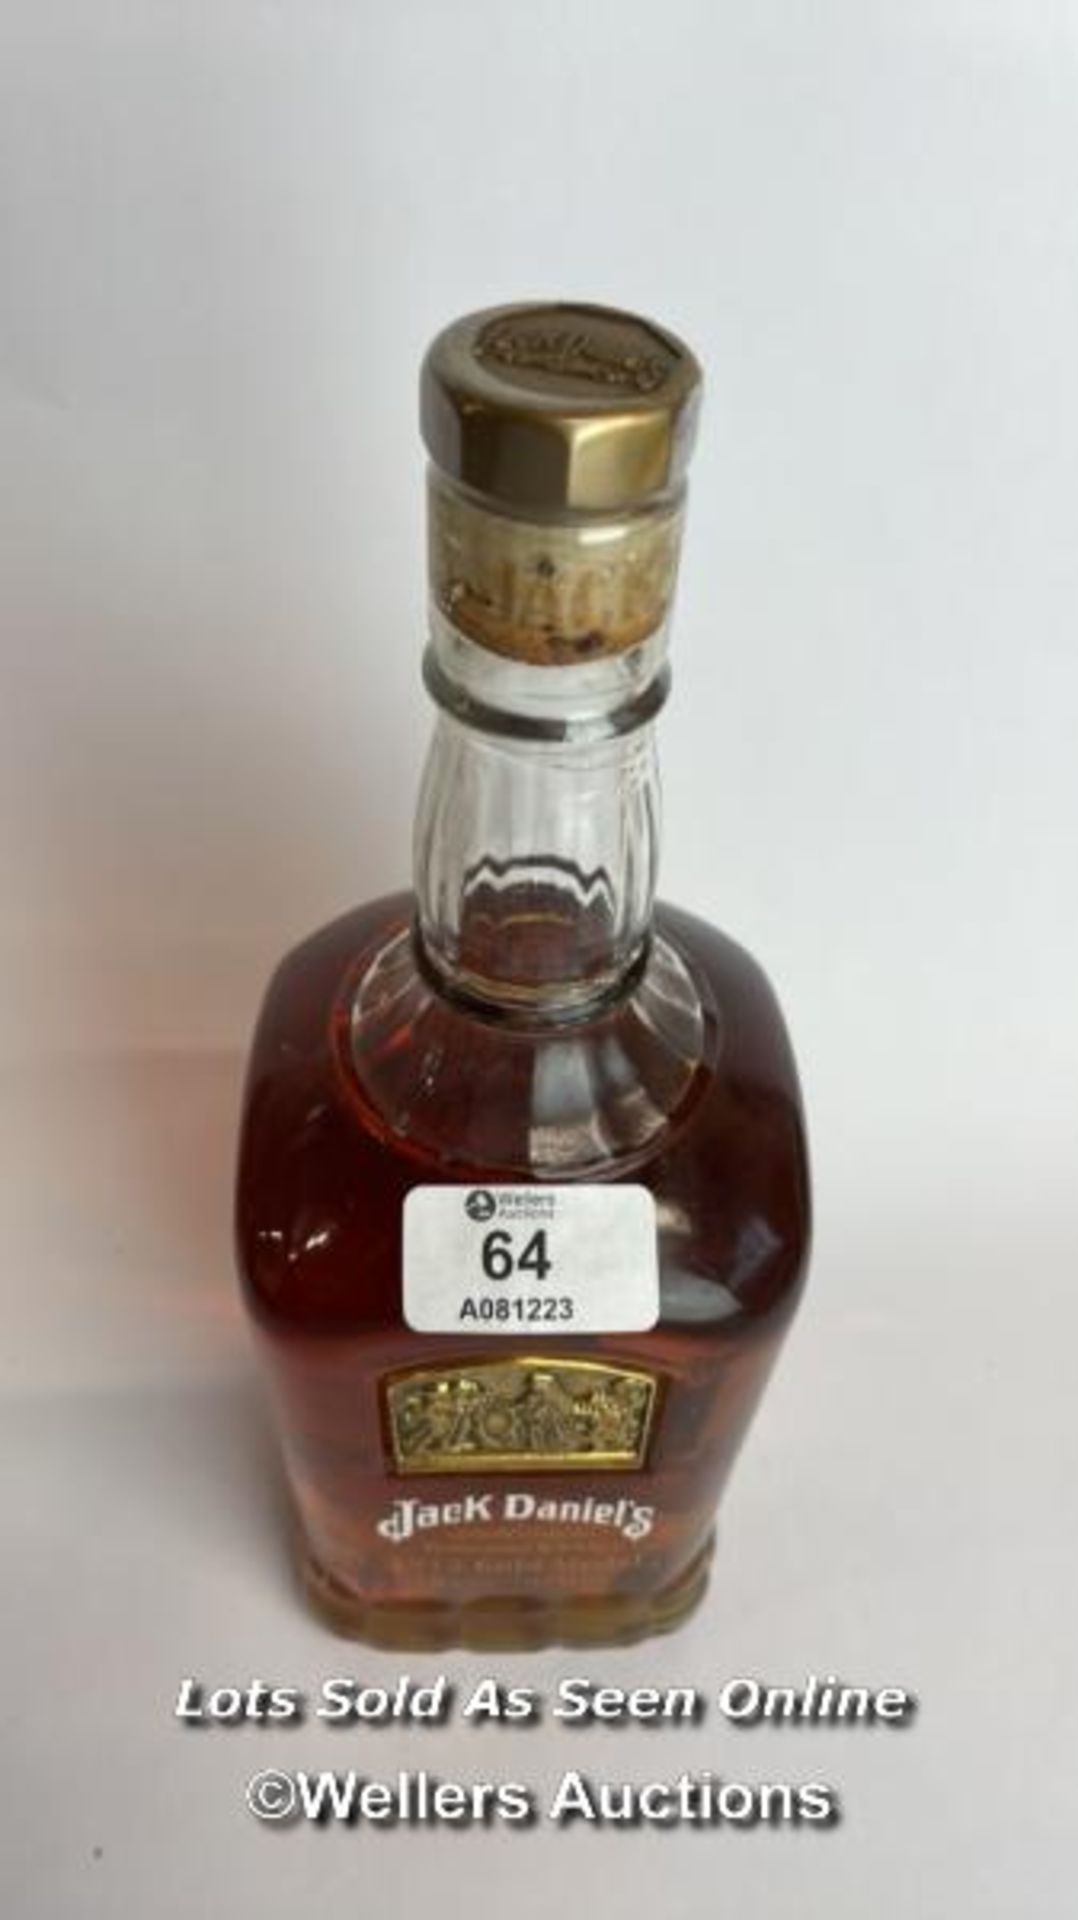 1913 Jack Daniels Tennesse Whiskey Gold Medal, 75cl, 43% vol / Please see images for fill level - Image 4 of 6